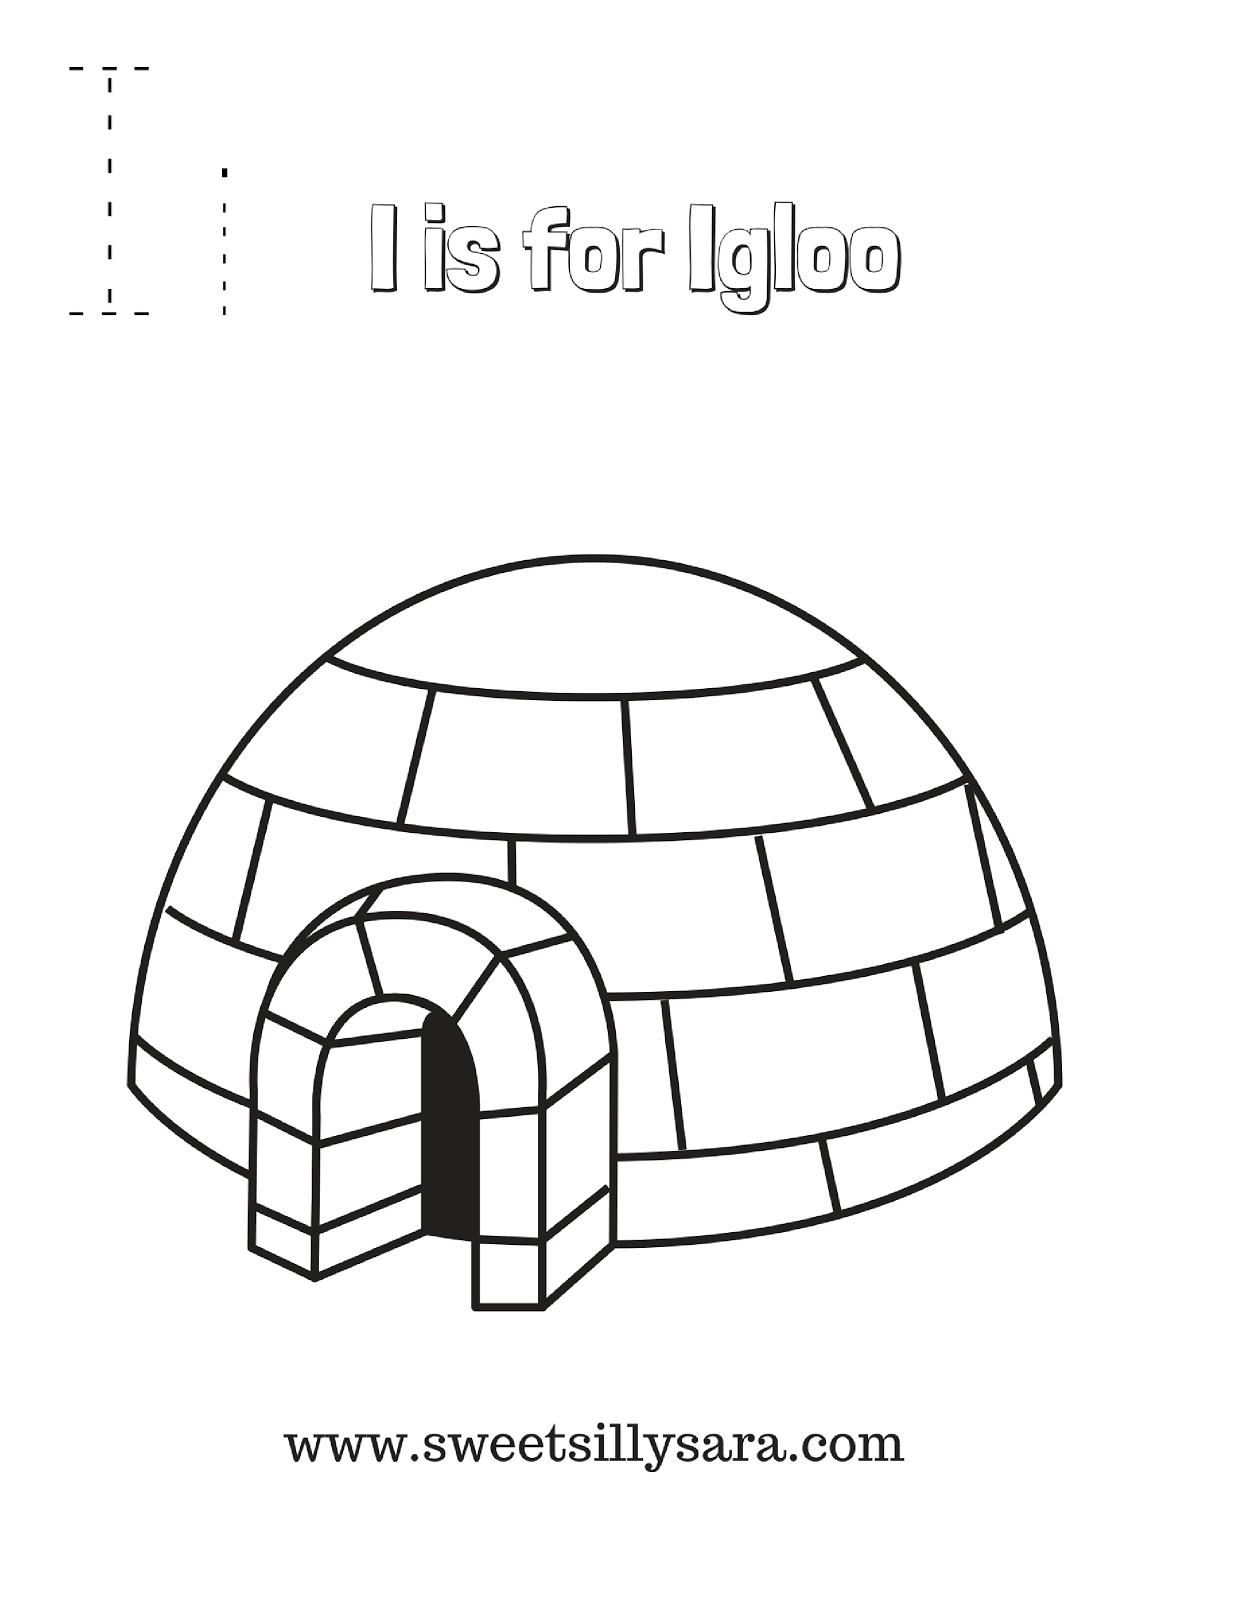 Coloring Page Of Igloo - 75+ SVG File for Cricut